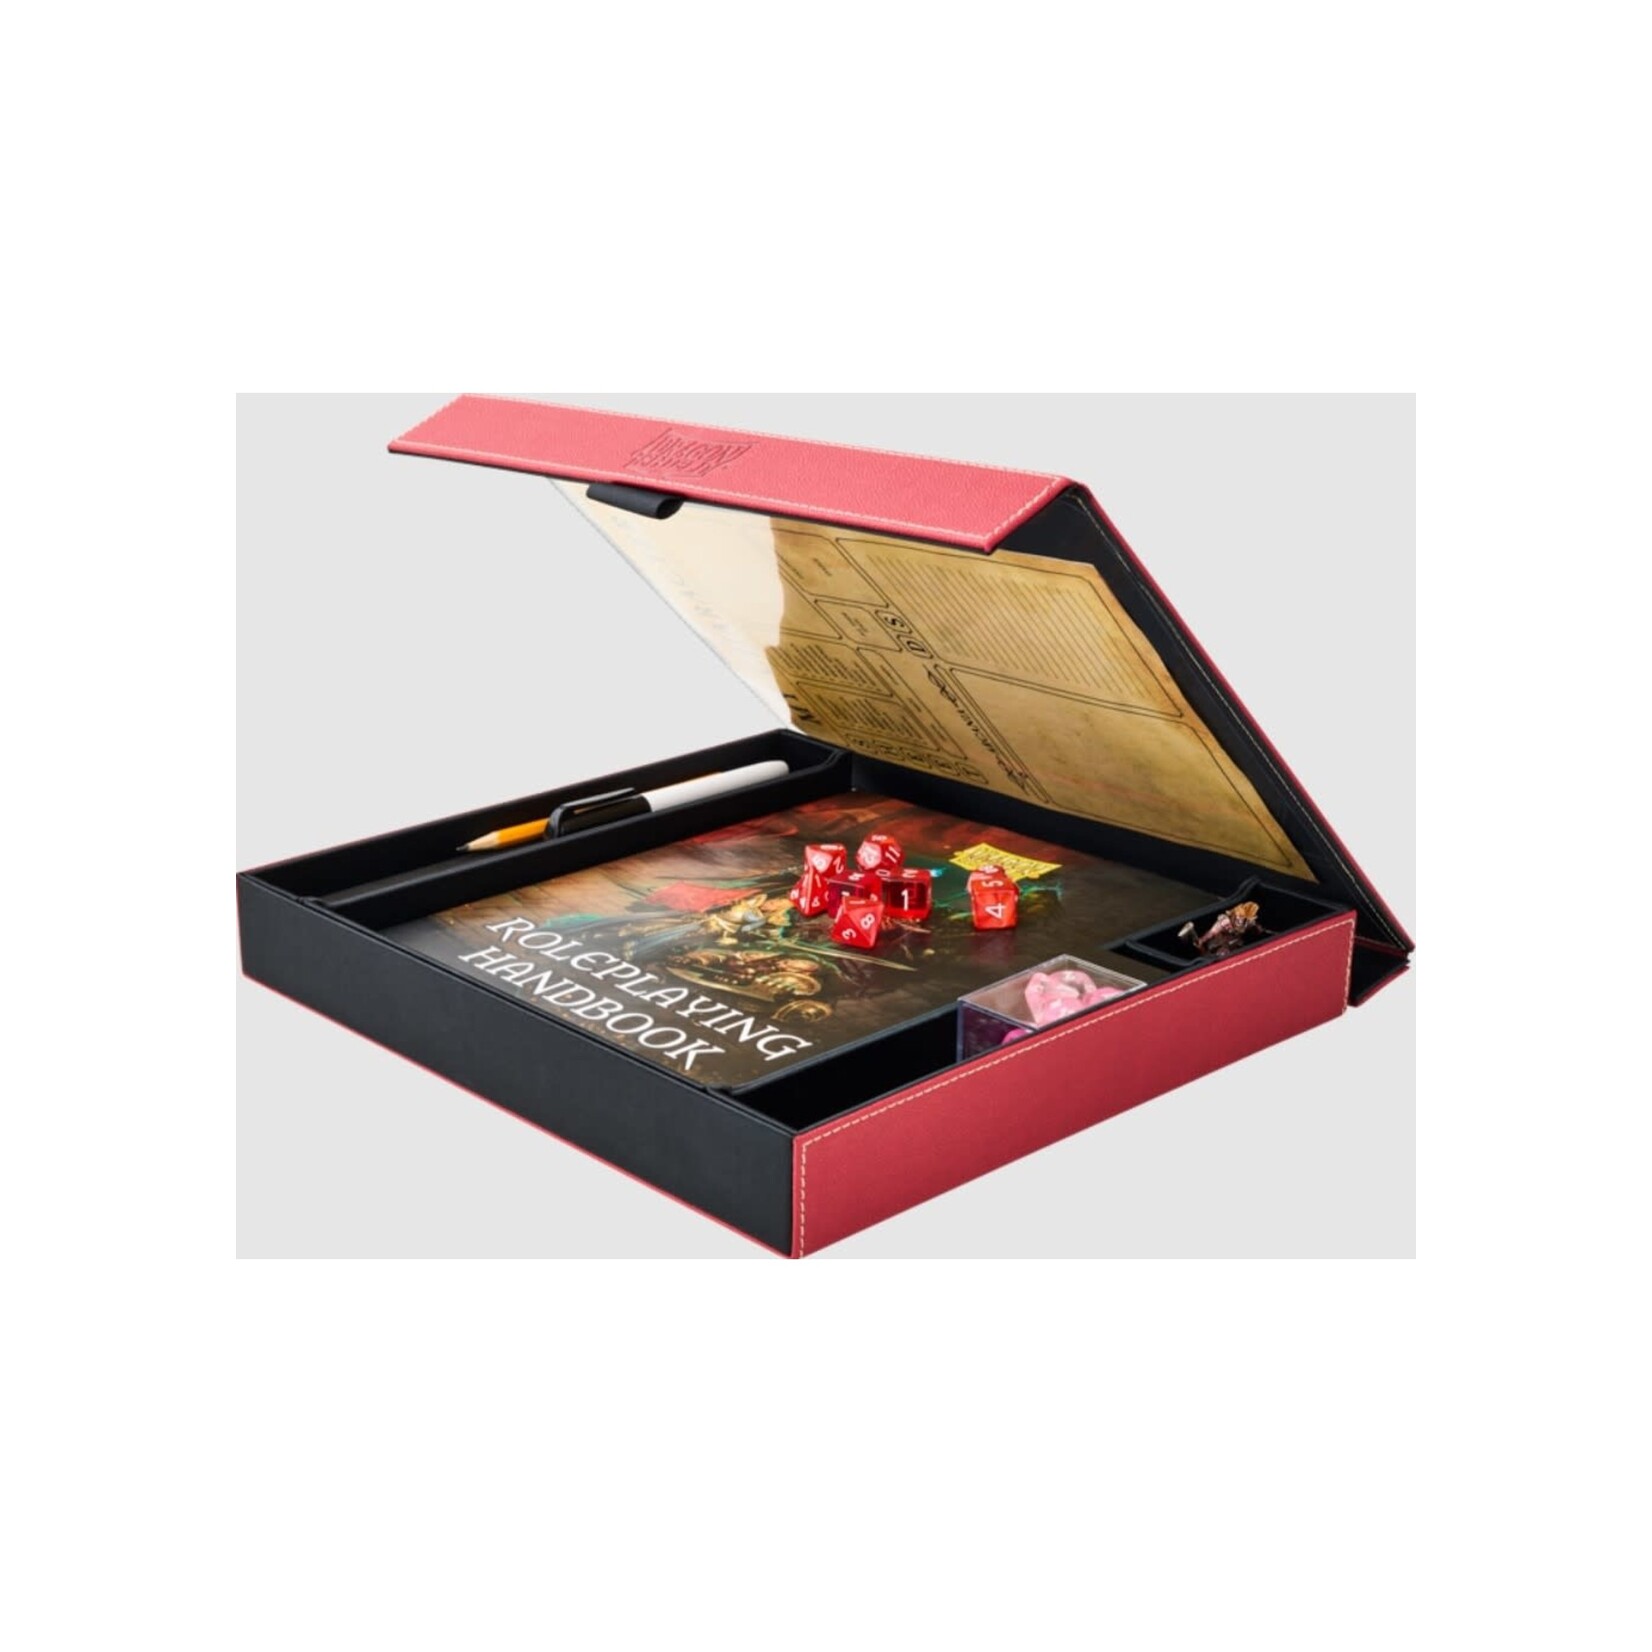 Dungeons & Dragons RPG: Player Companion: Box & Dice Tray - Blood Red